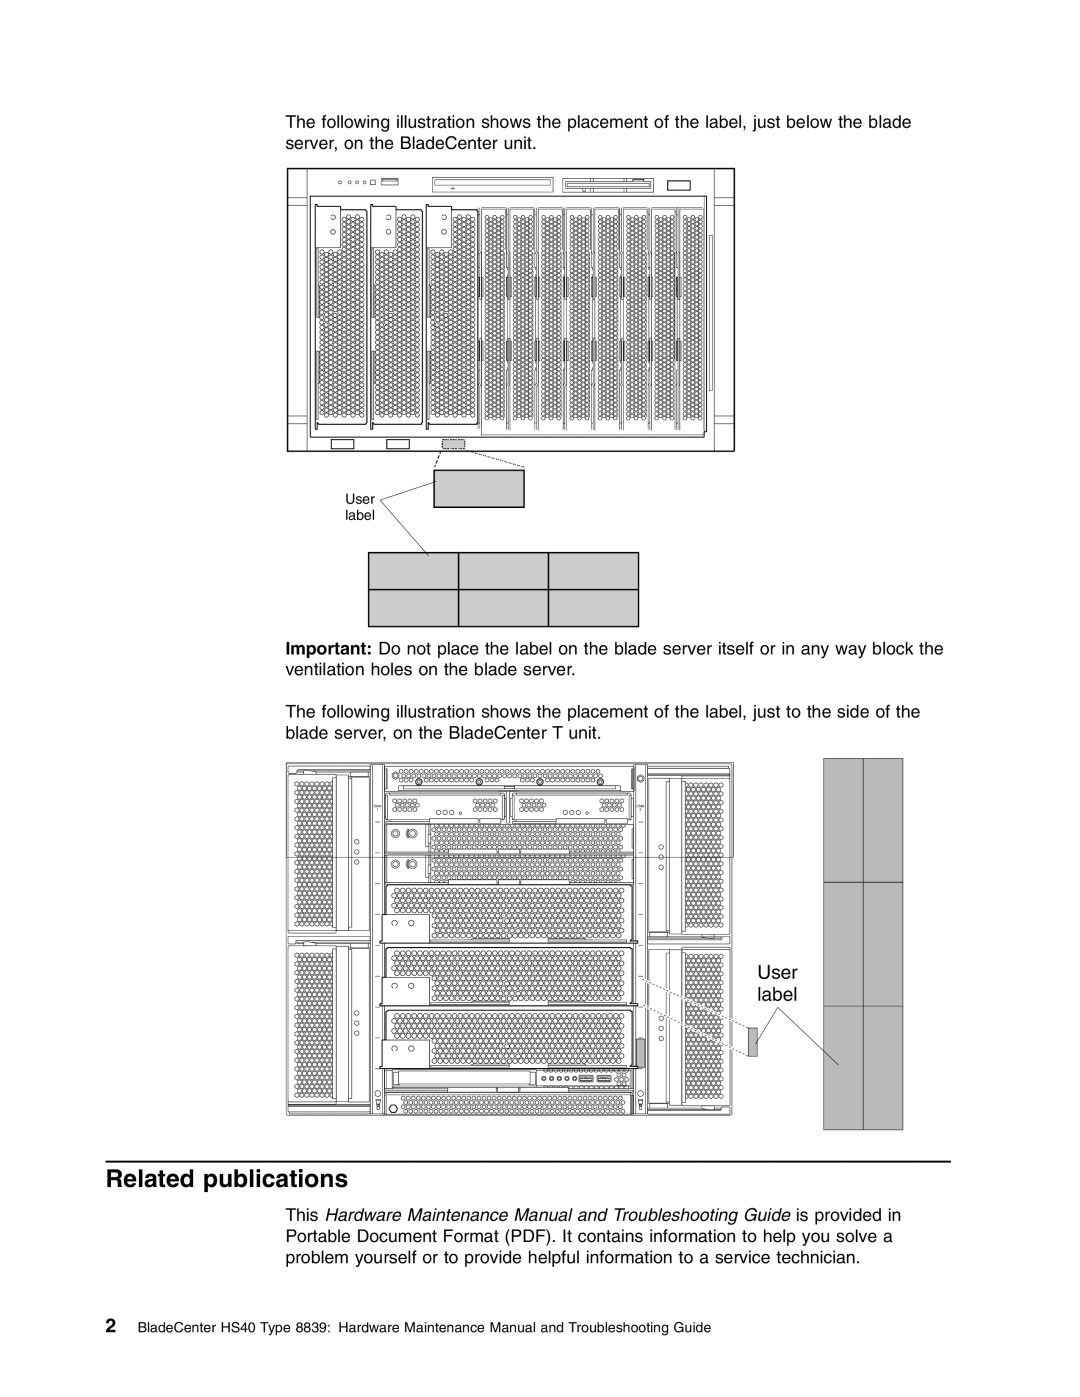 IBM HS40 manual Related publications, User label 